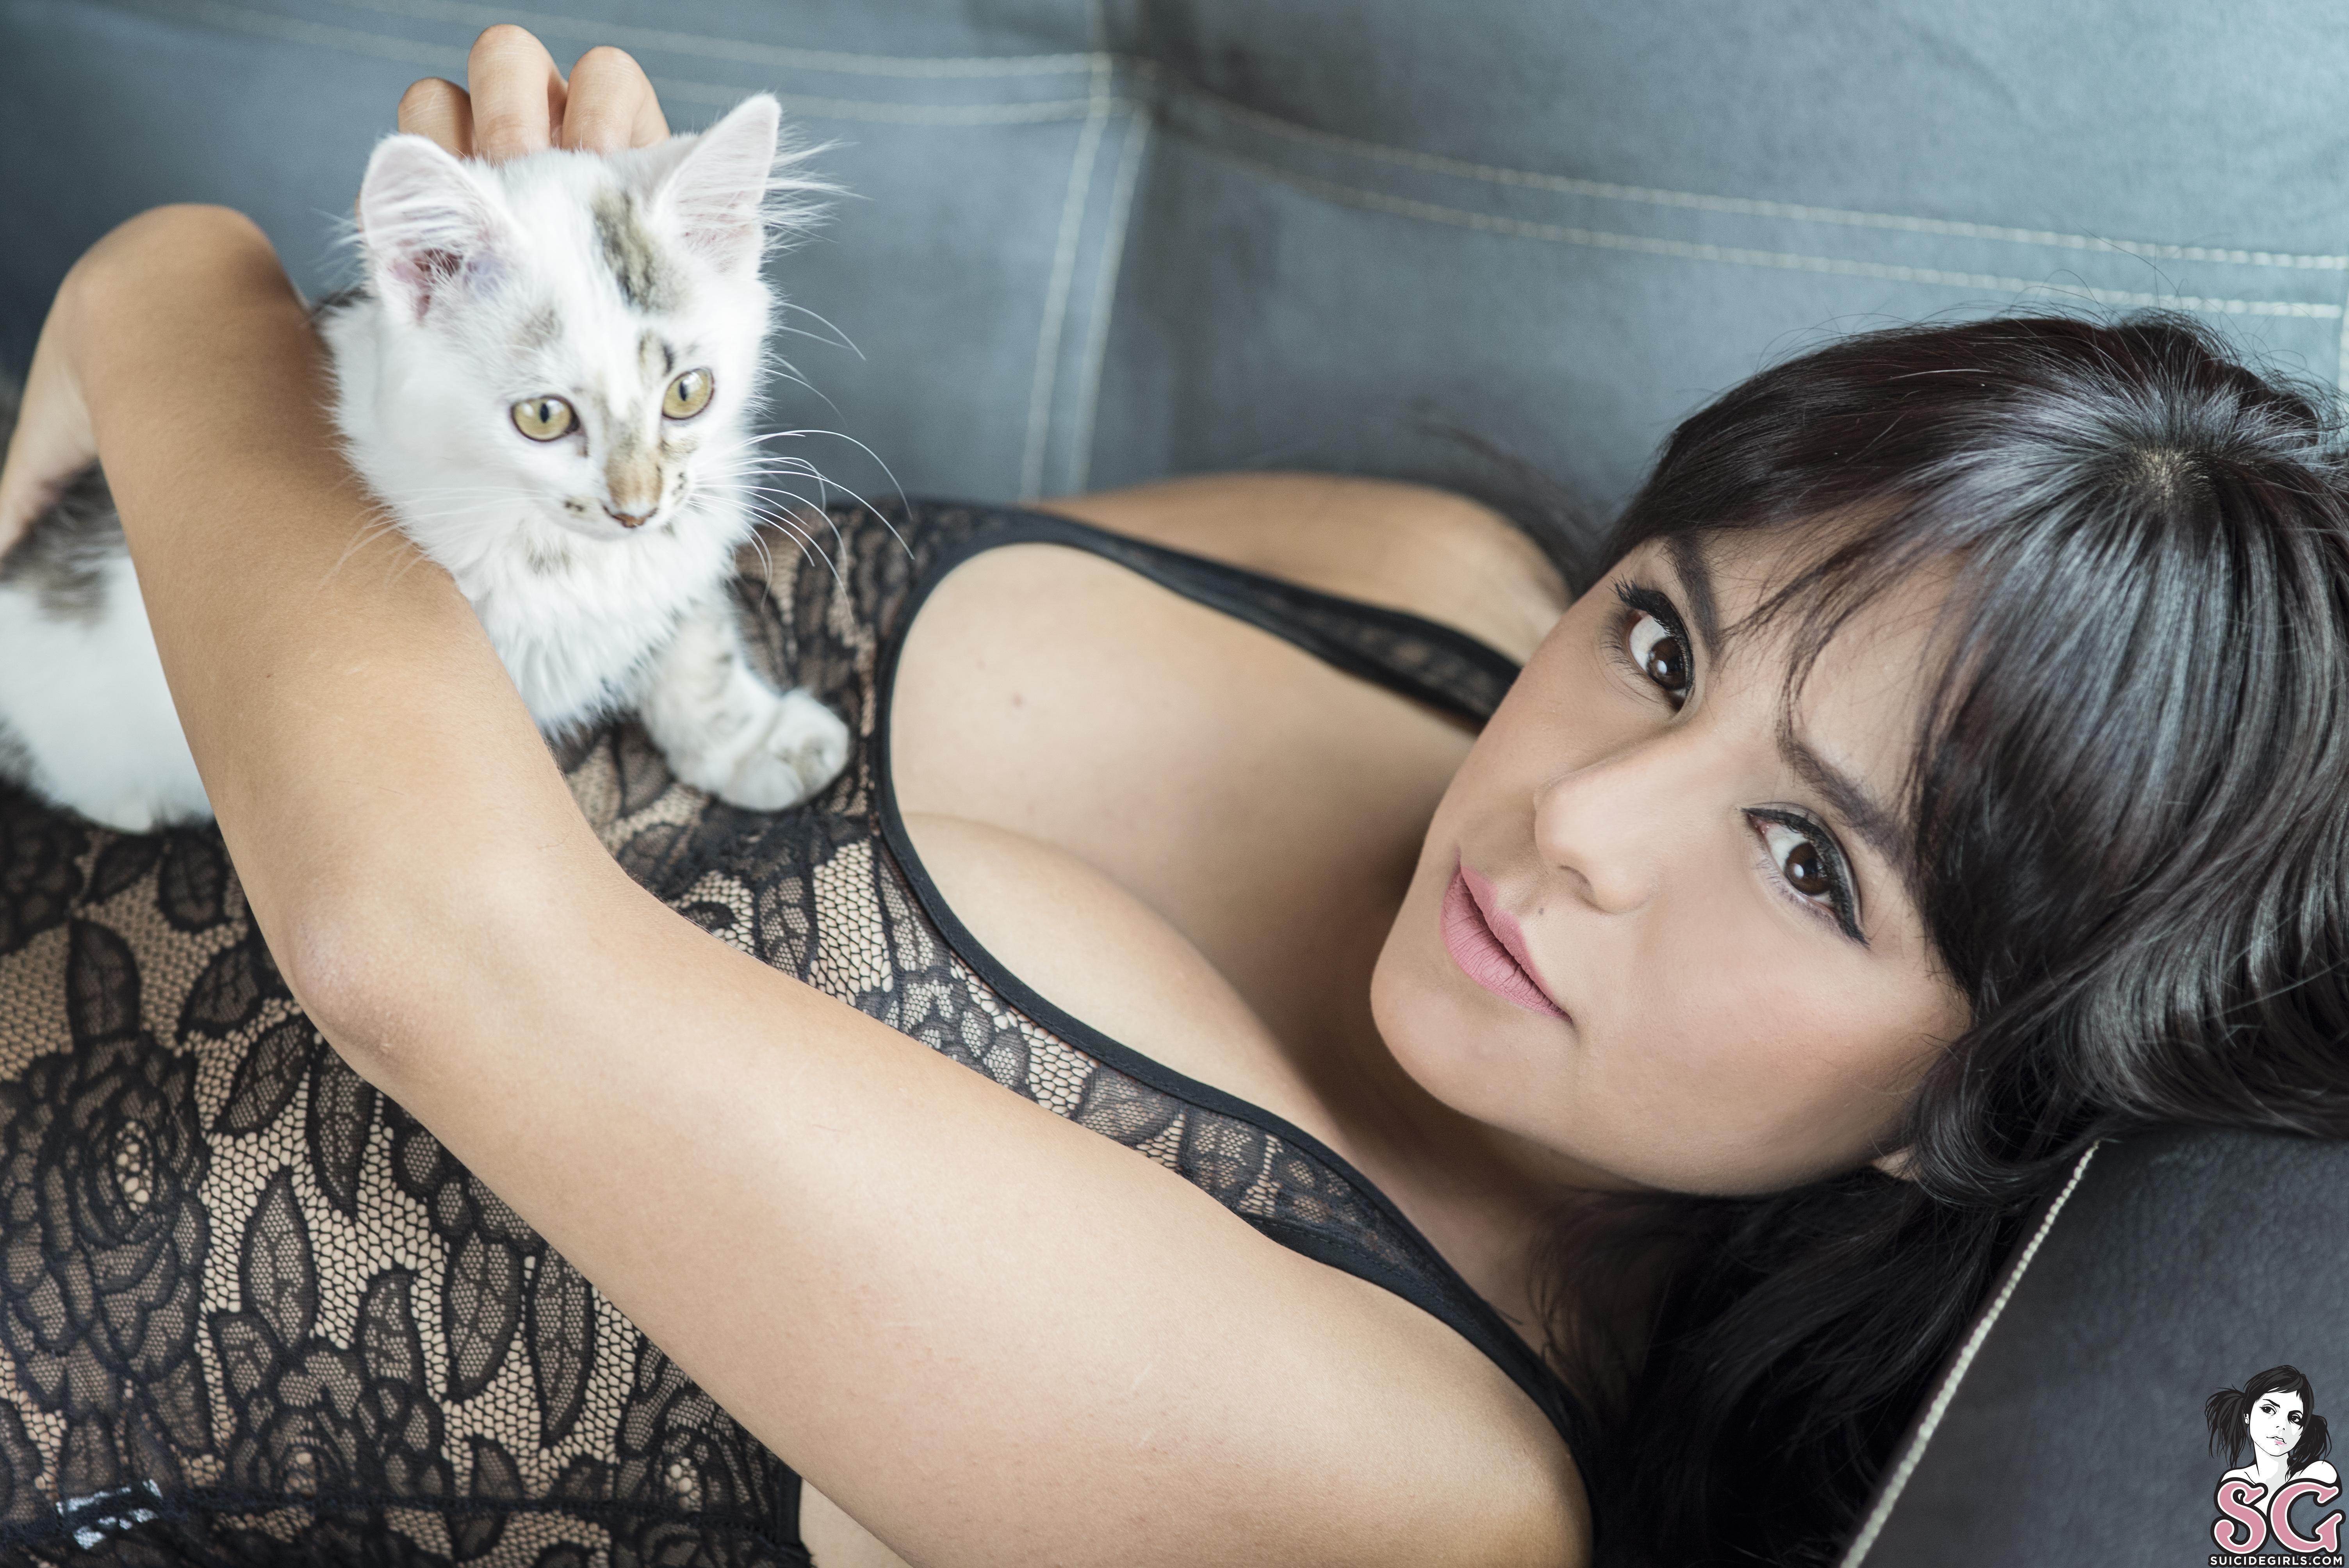 People 6016x4016 Suicide Girls couch cats black hair brown eyes lying on back kittens women with cat women